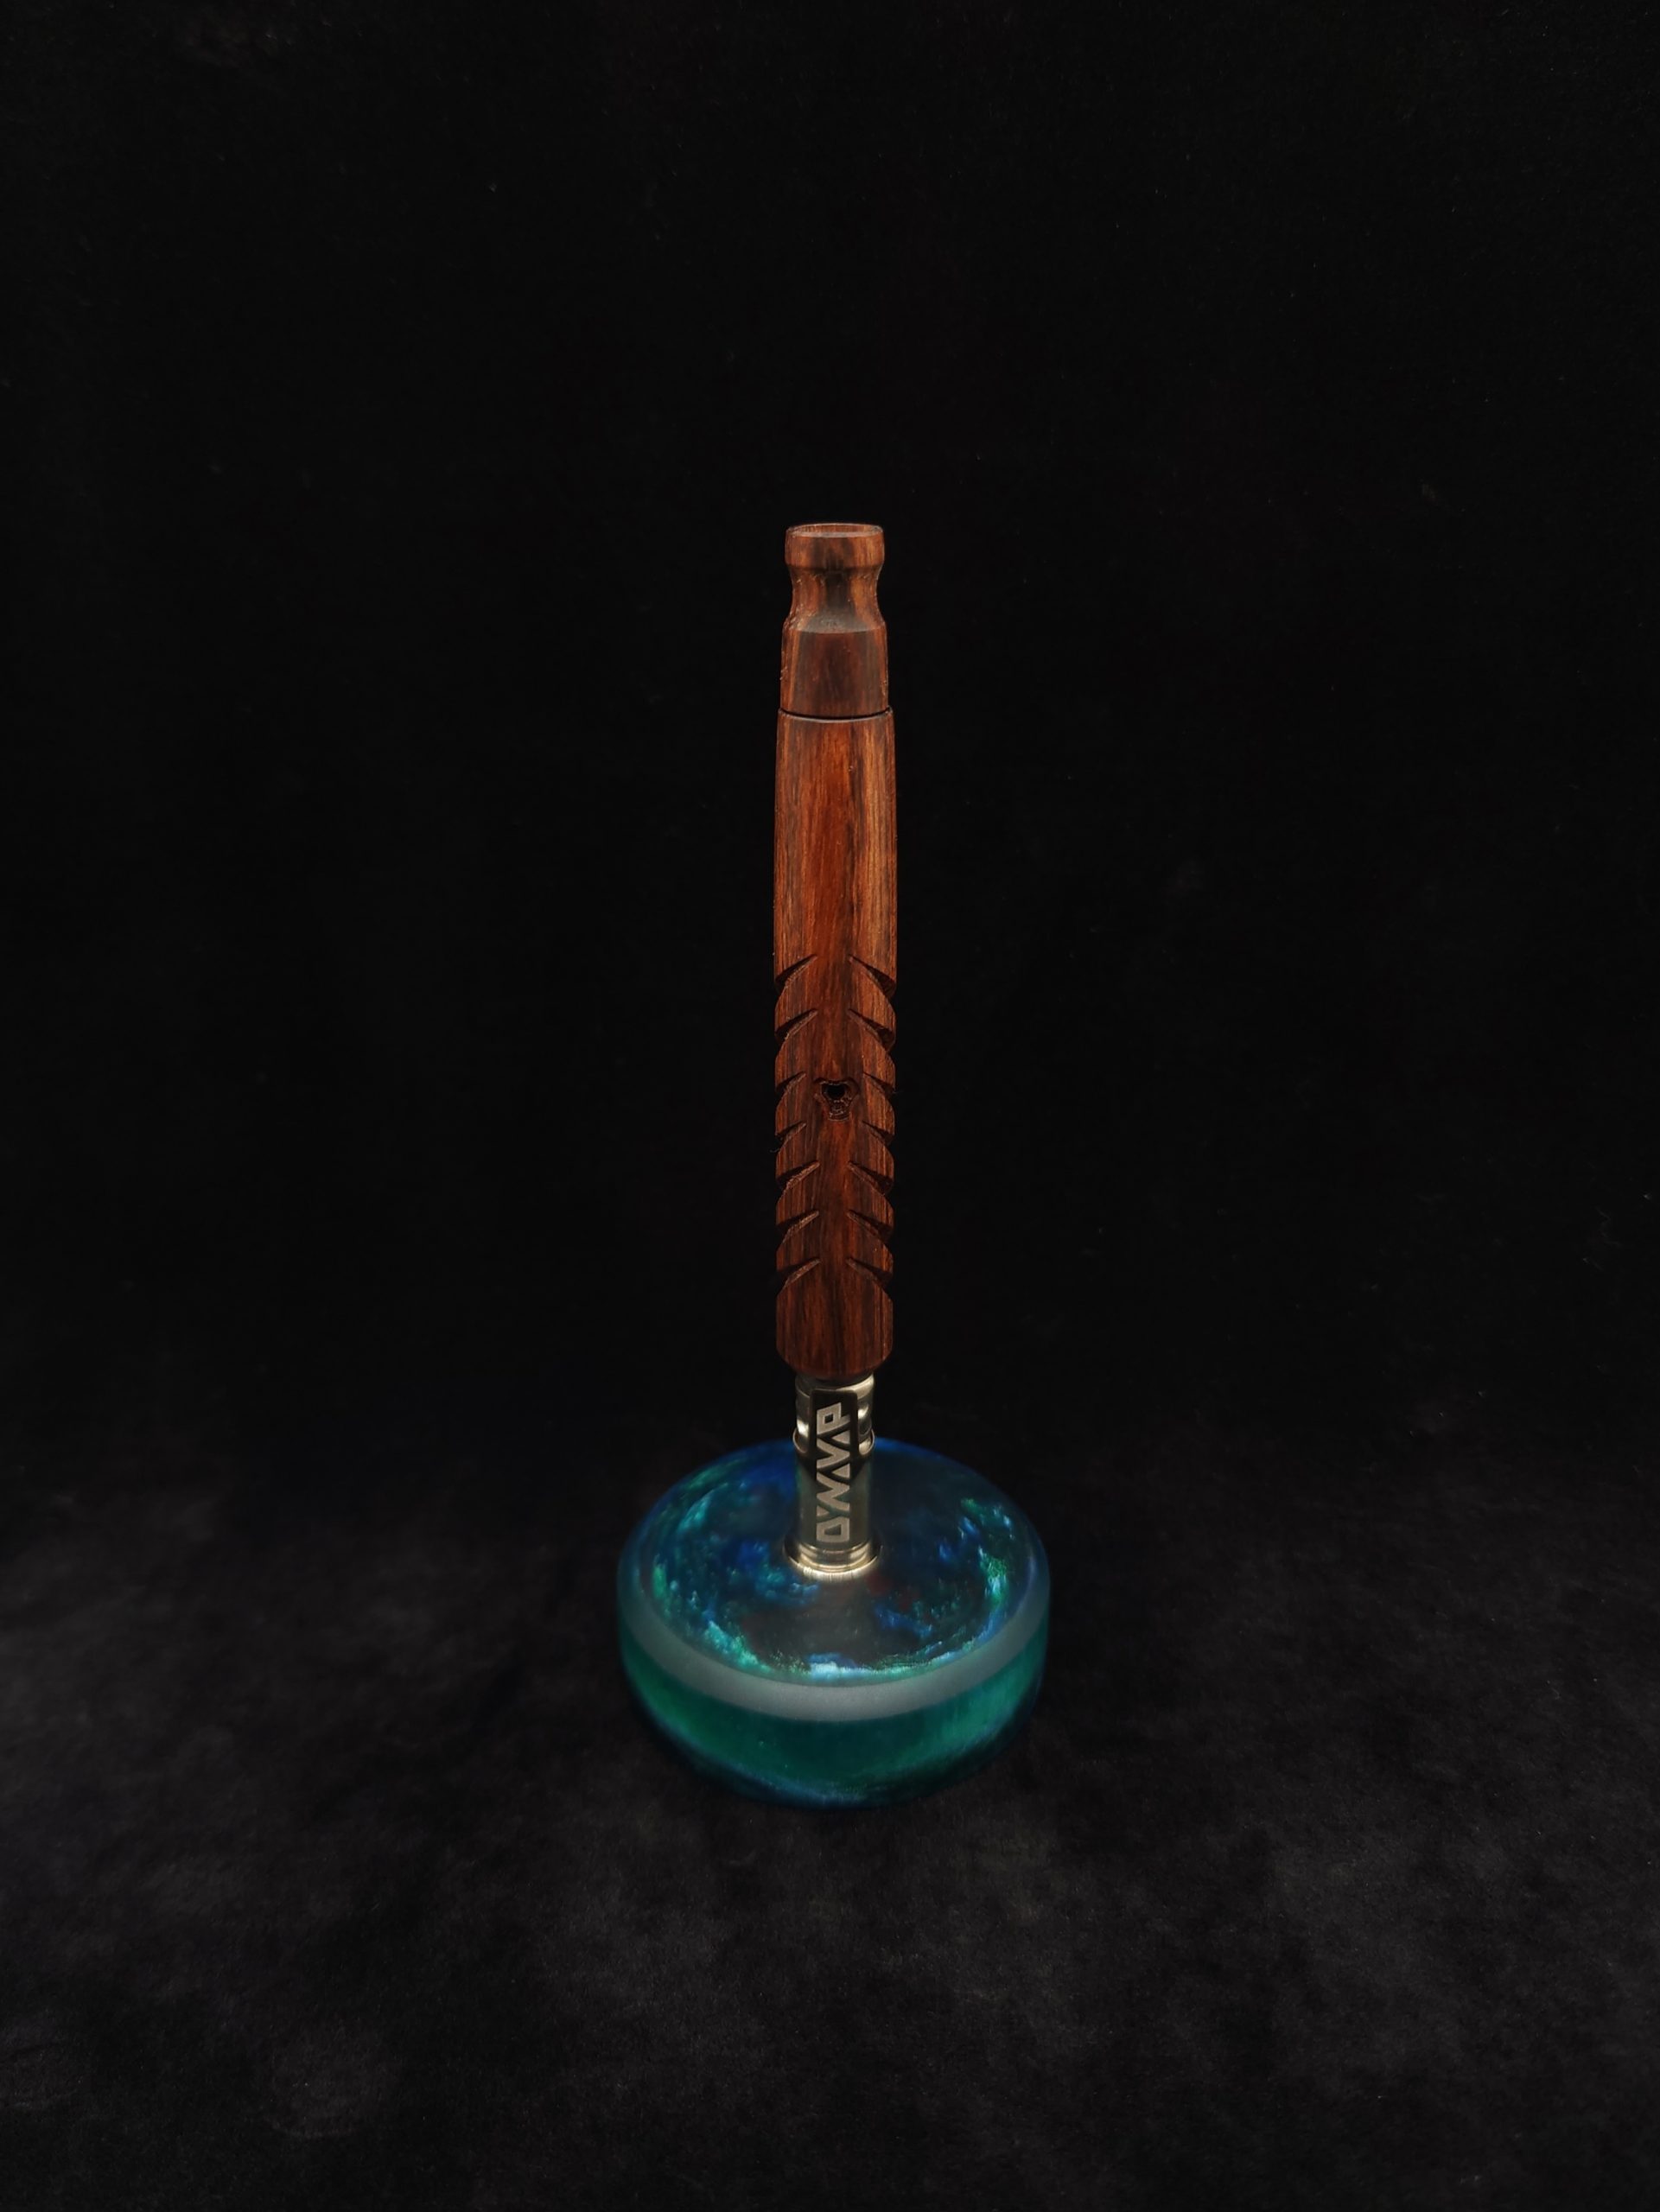 This image portrays Reaper XL Dynavap Stem/Tuscan Rosewood + Matching Mouthpiece by Dovetail Woodwork.